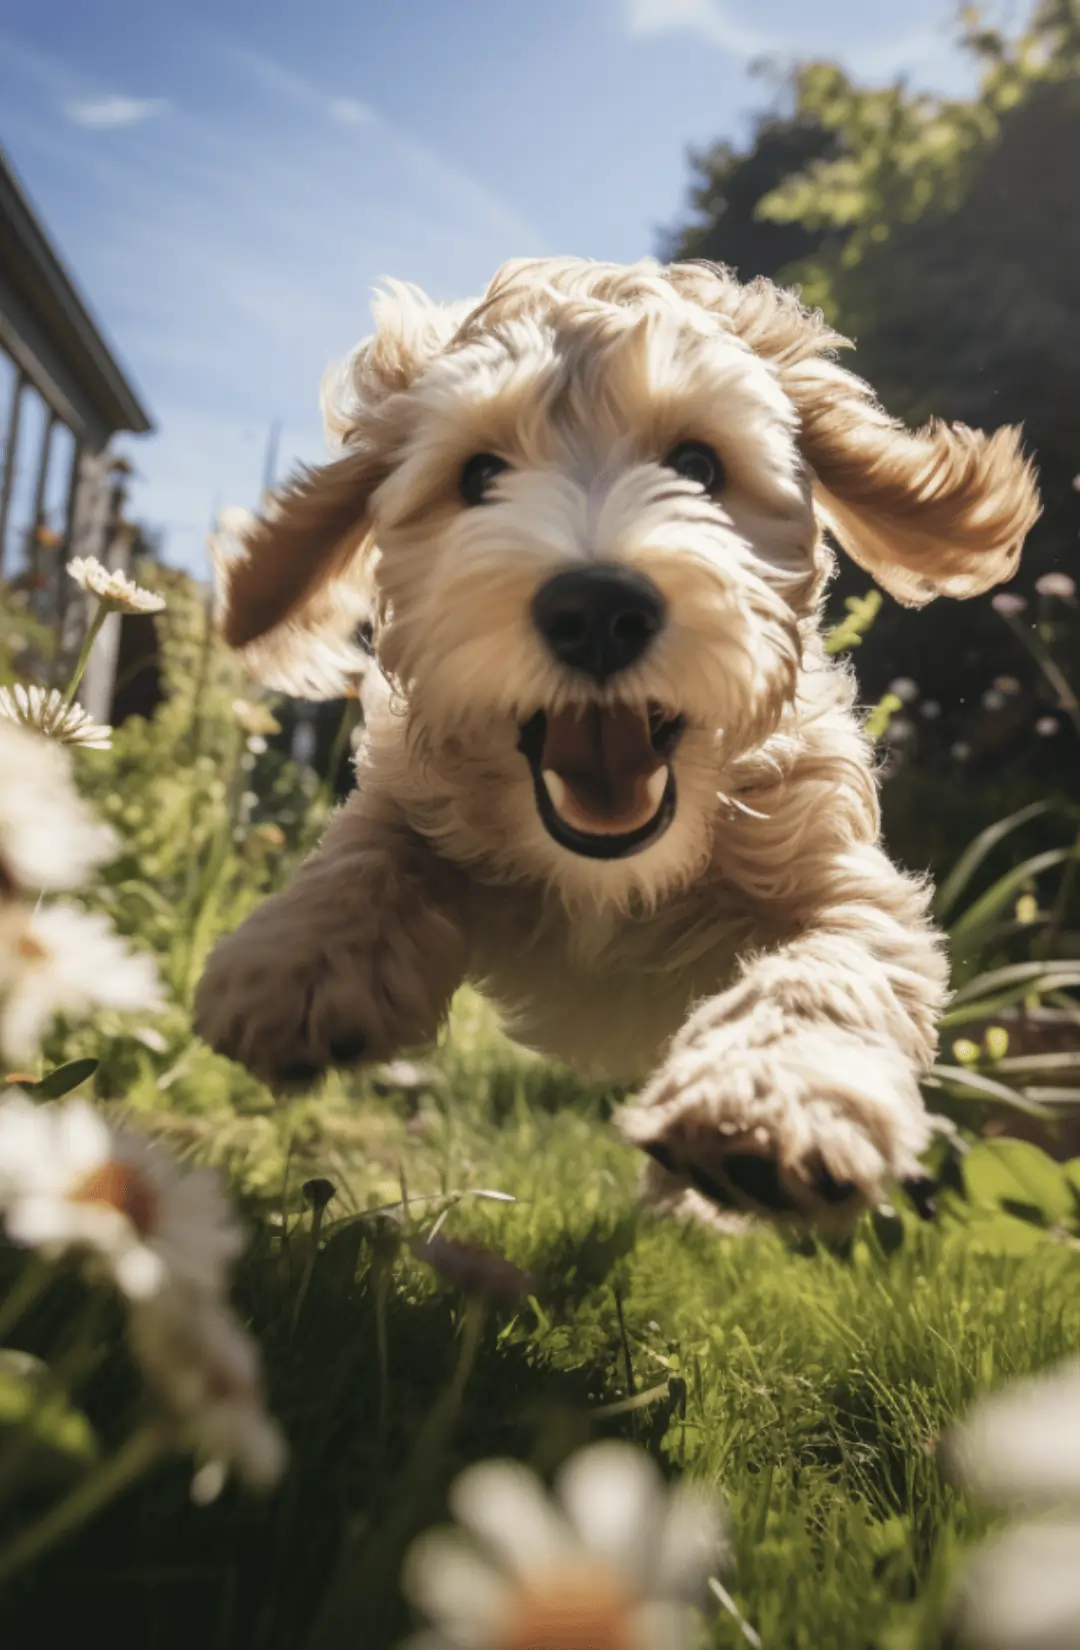 a happy dog jumping and smiling midair - Knose dog insurance